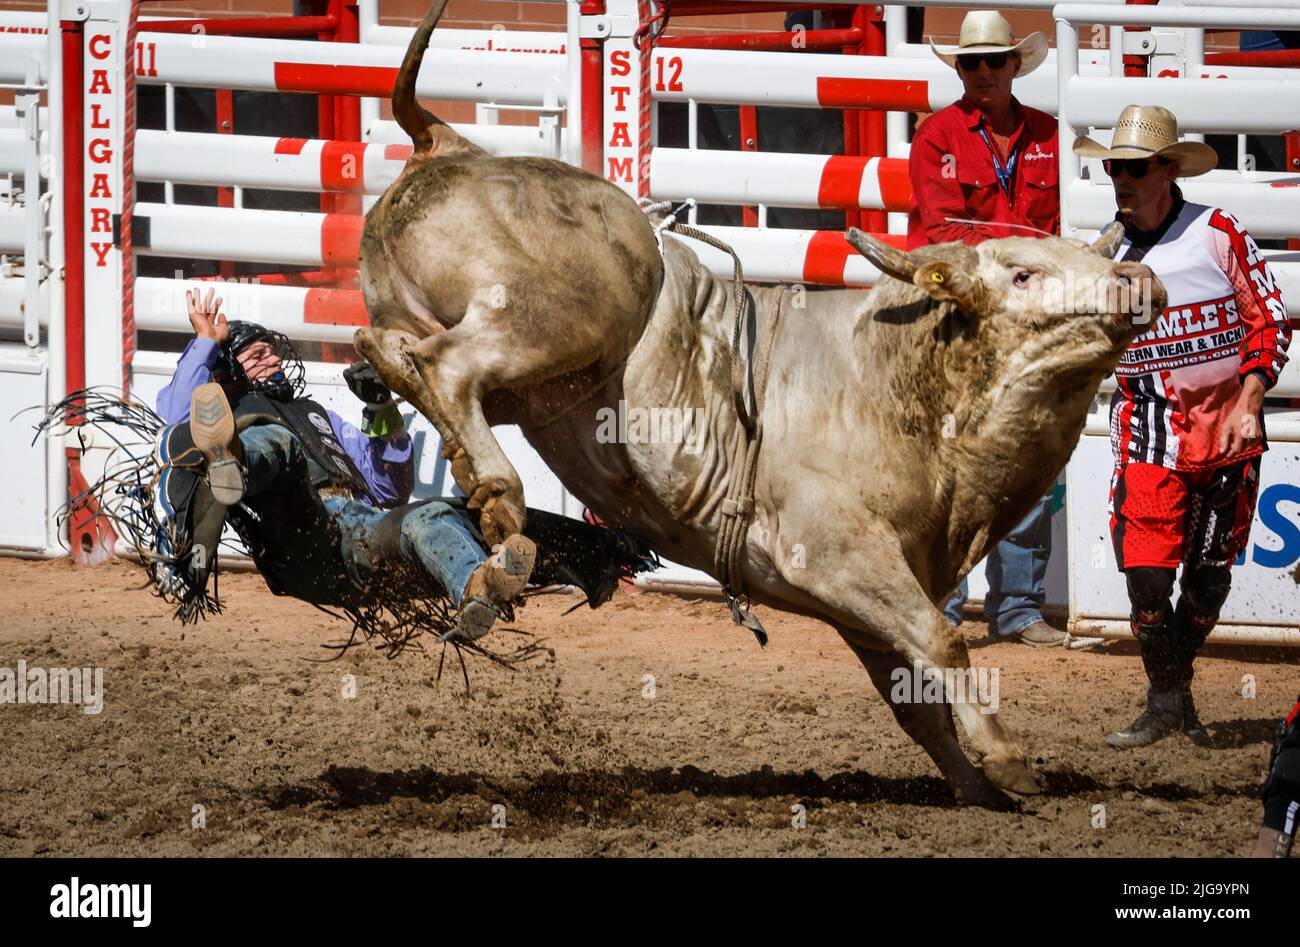 July 8, 2022, Calgary, AB, CANADA: Jared Parsonage, of Maple Creek, Sask., is bucked off during bull riding rodeo action at the Calgary Stampede in Calgary, Alta., Friday, July 8, 2022. (Credit Image: © Jeff Mcintosh/The Canadian Press via ZUMA Press) Stock Photo